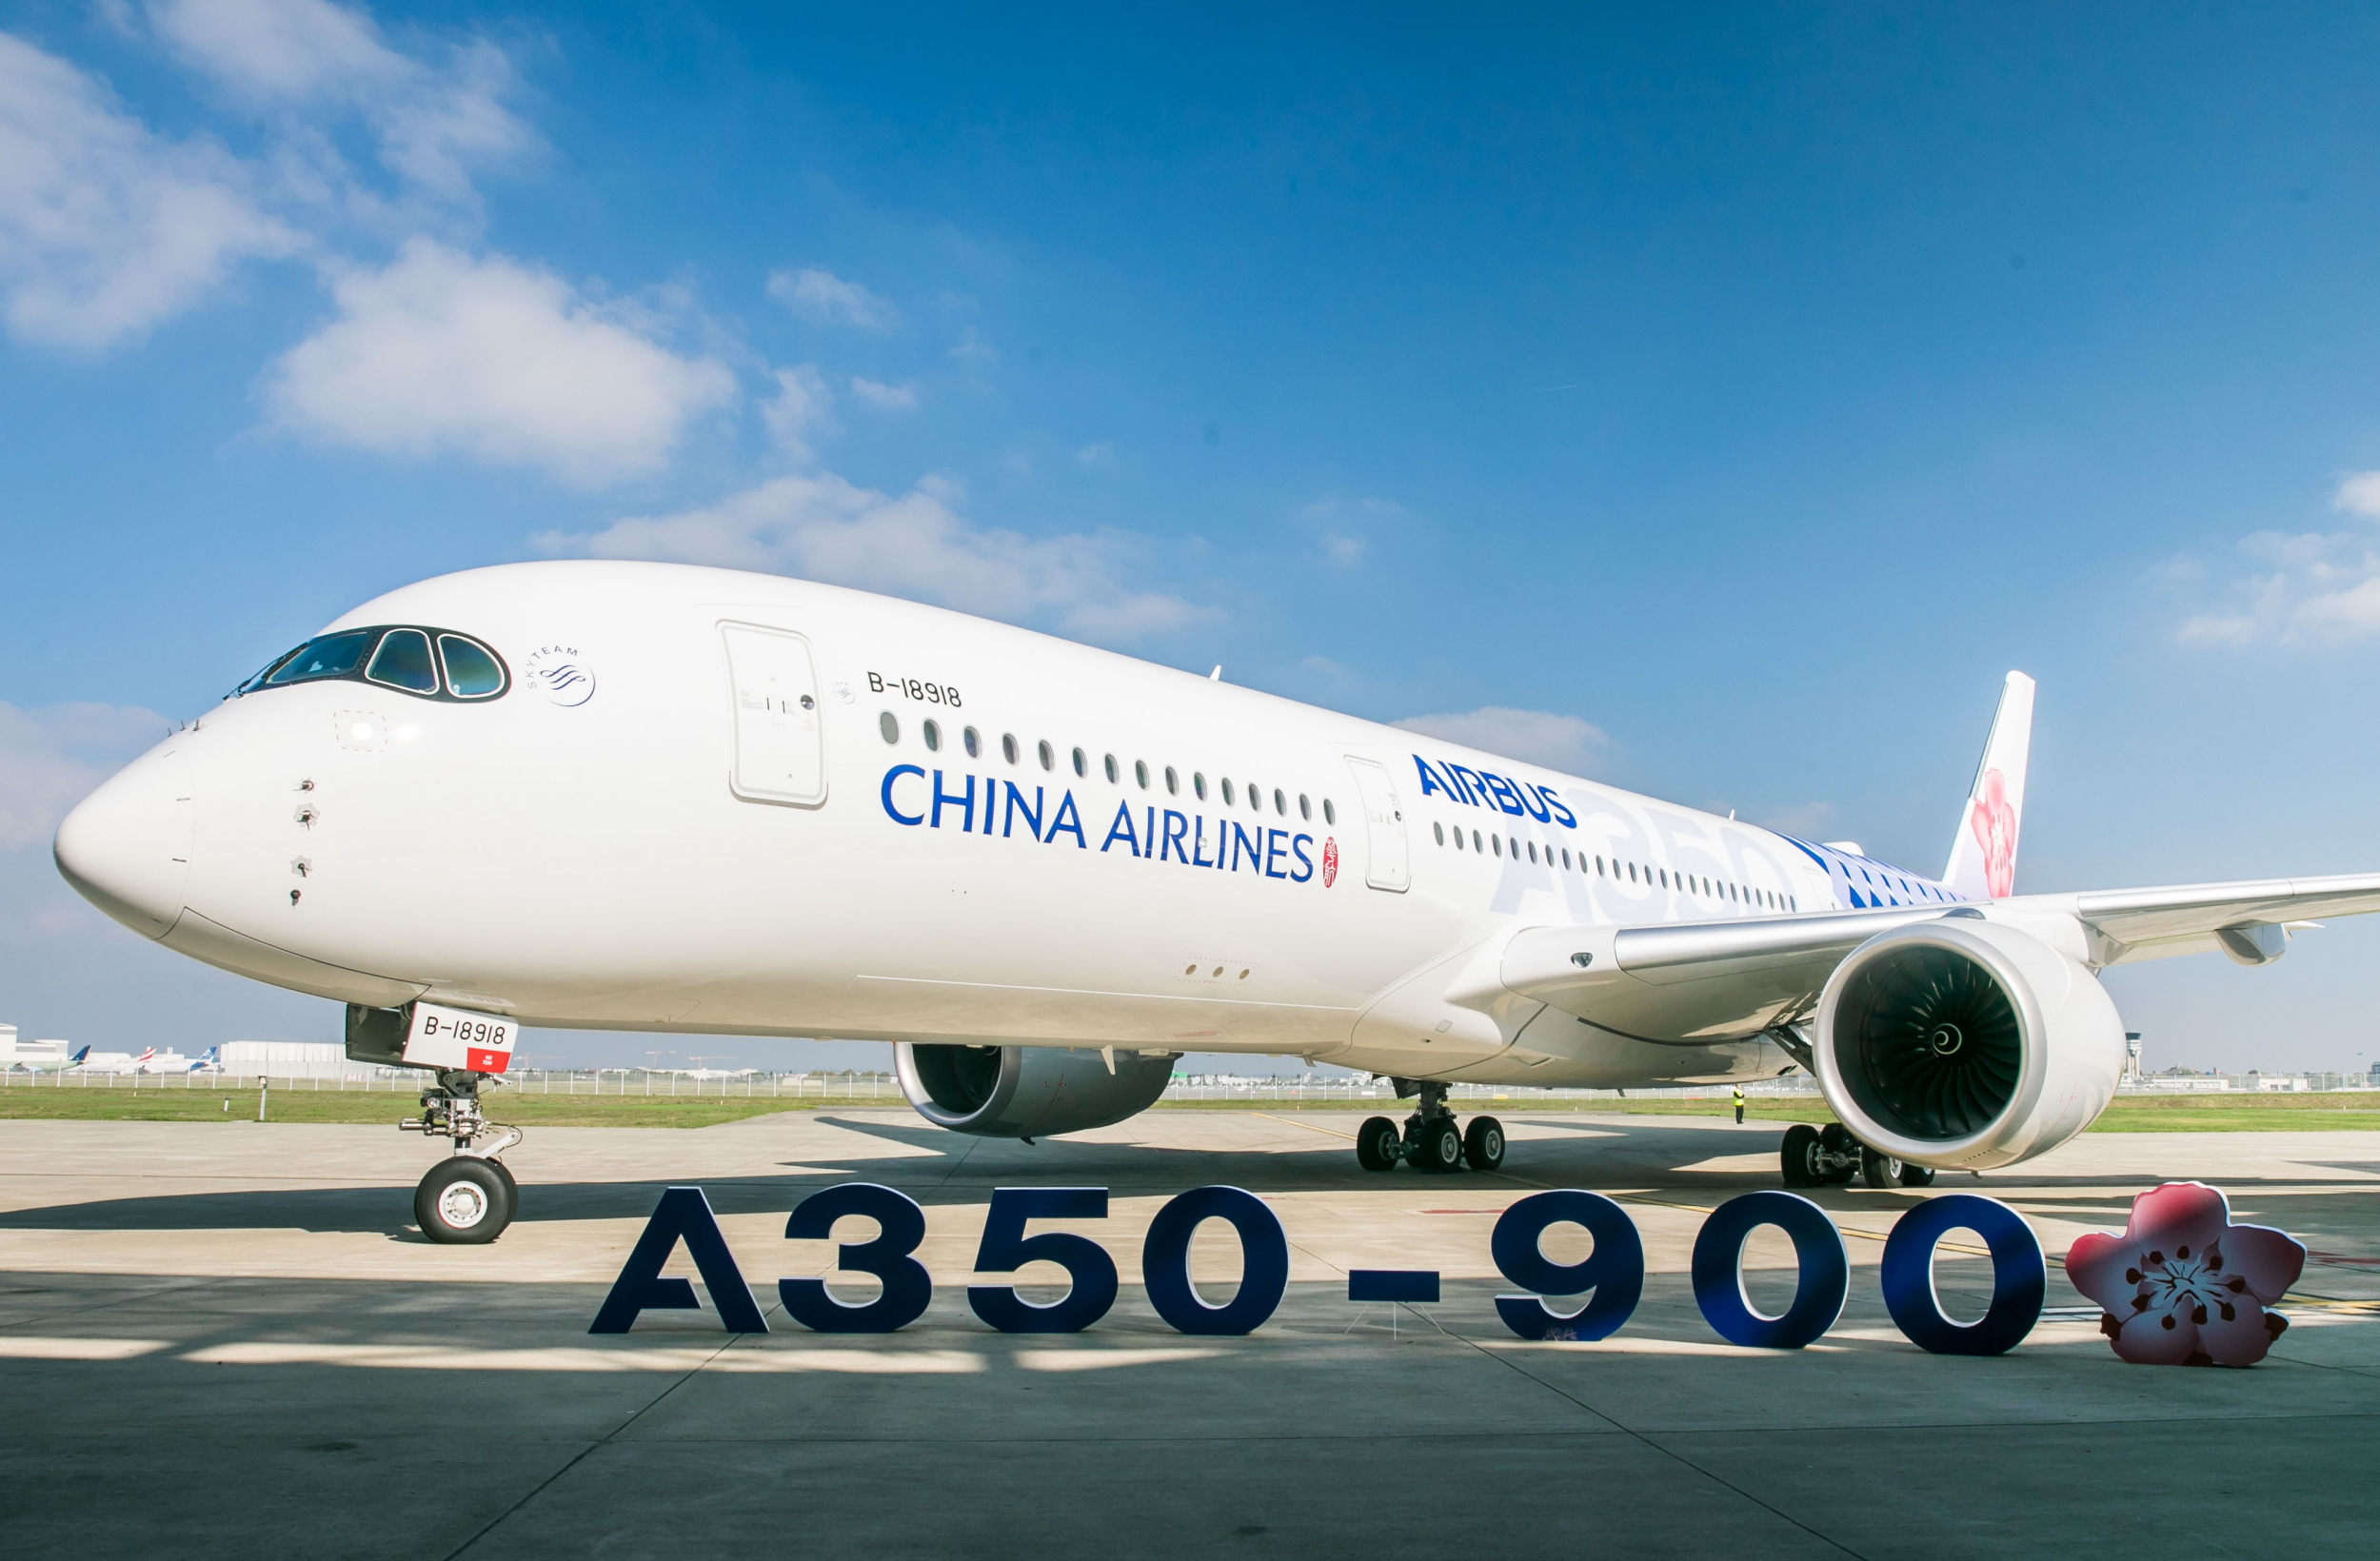 China Airlines has taken delivery of a very special Airbus A350-900 aircraft. The new aircraft is the first in Taiwan to feature a joint Airbus livery and the only Airbus joint liveried aircraft to feature corporate colors. Click to enlarge.